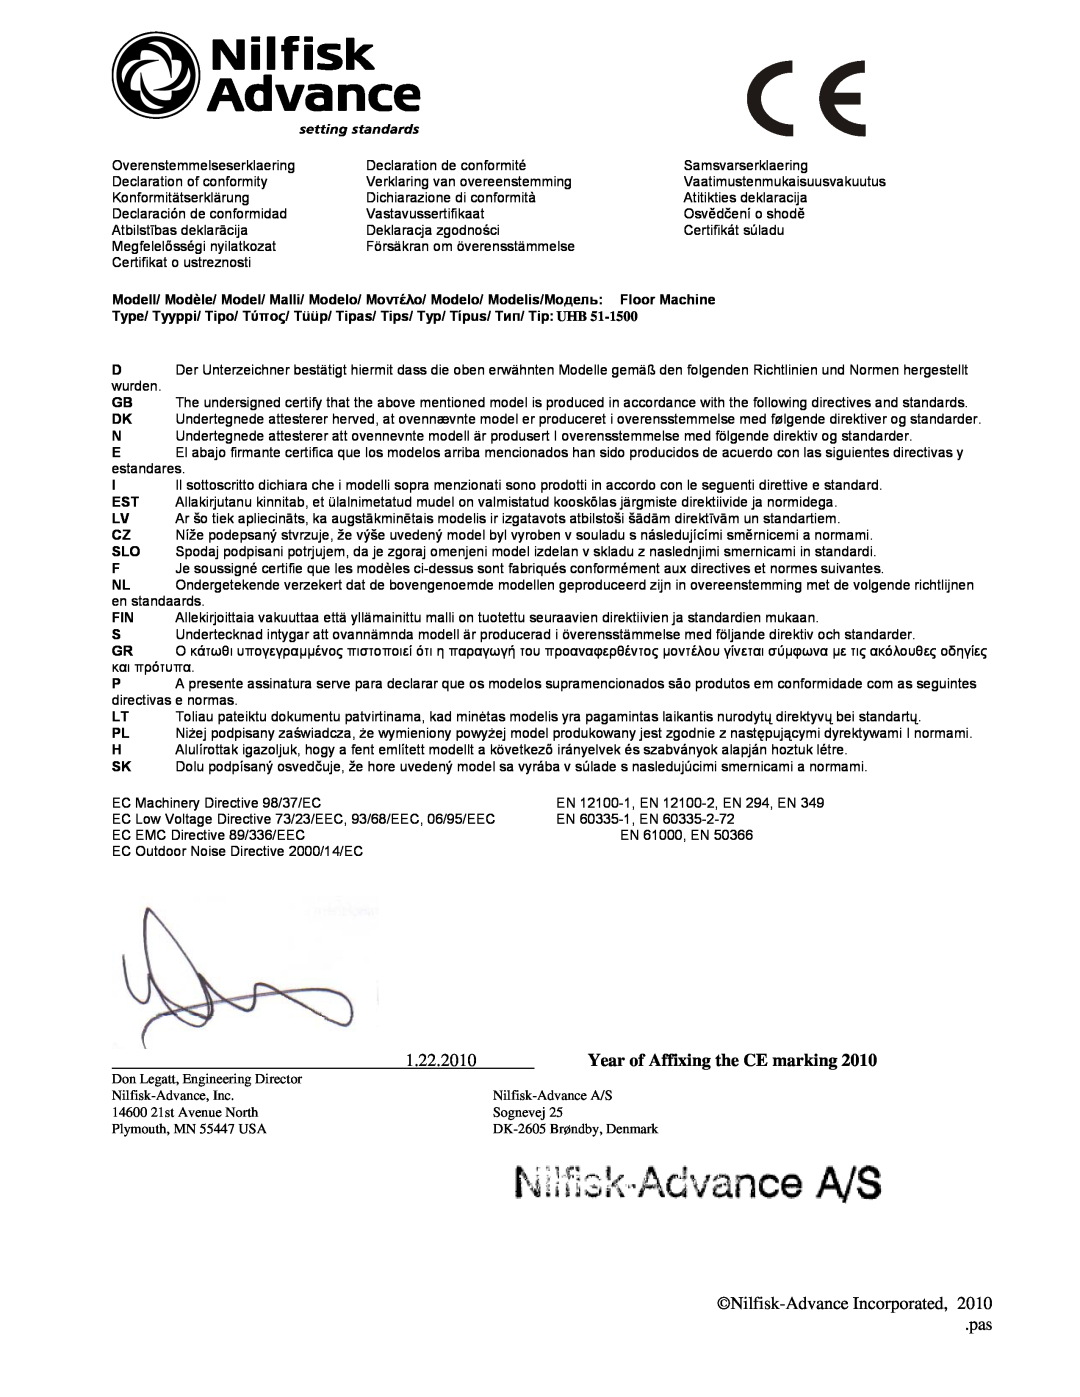 Nilfisk-Advance America 01610A manual 1.22.2010, Year of Affixing the CE marking, Nilfisk-AdvanceIncorporated, pas 